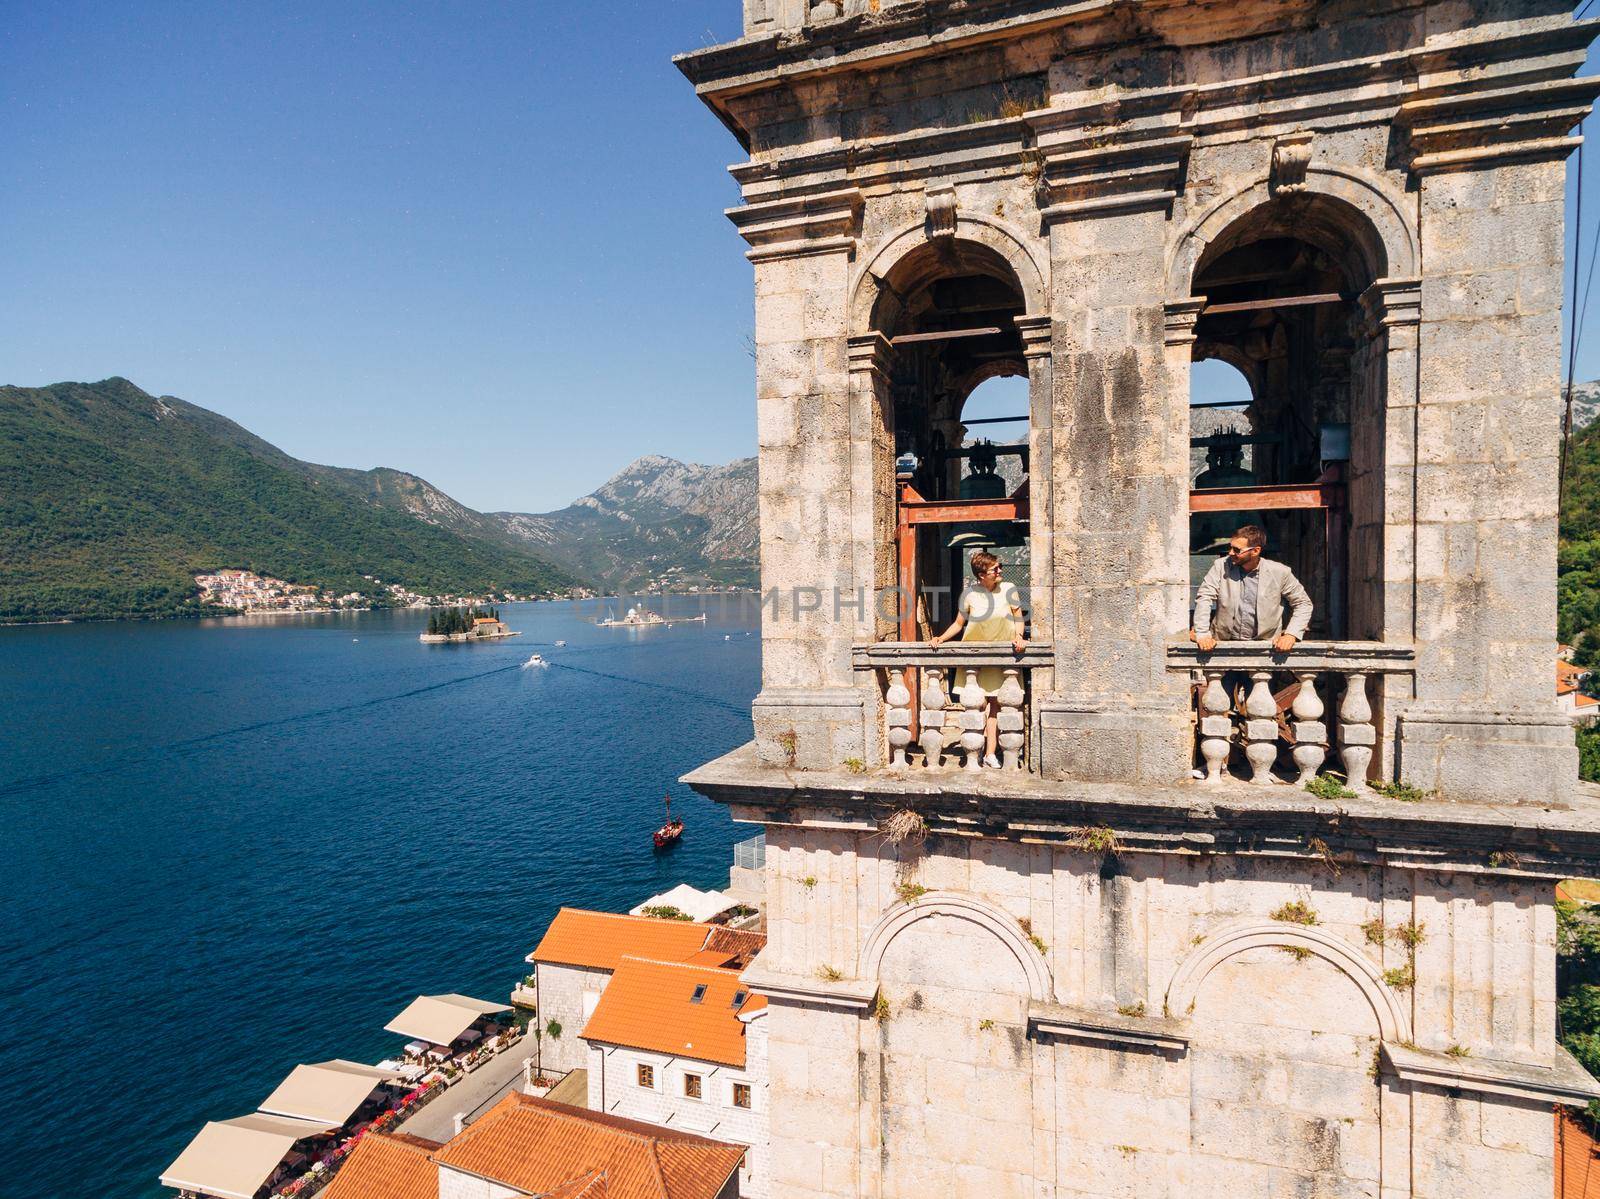 A man and a woman look out of the windows of the tower and look at each other over the old town of Perast . High quality photo